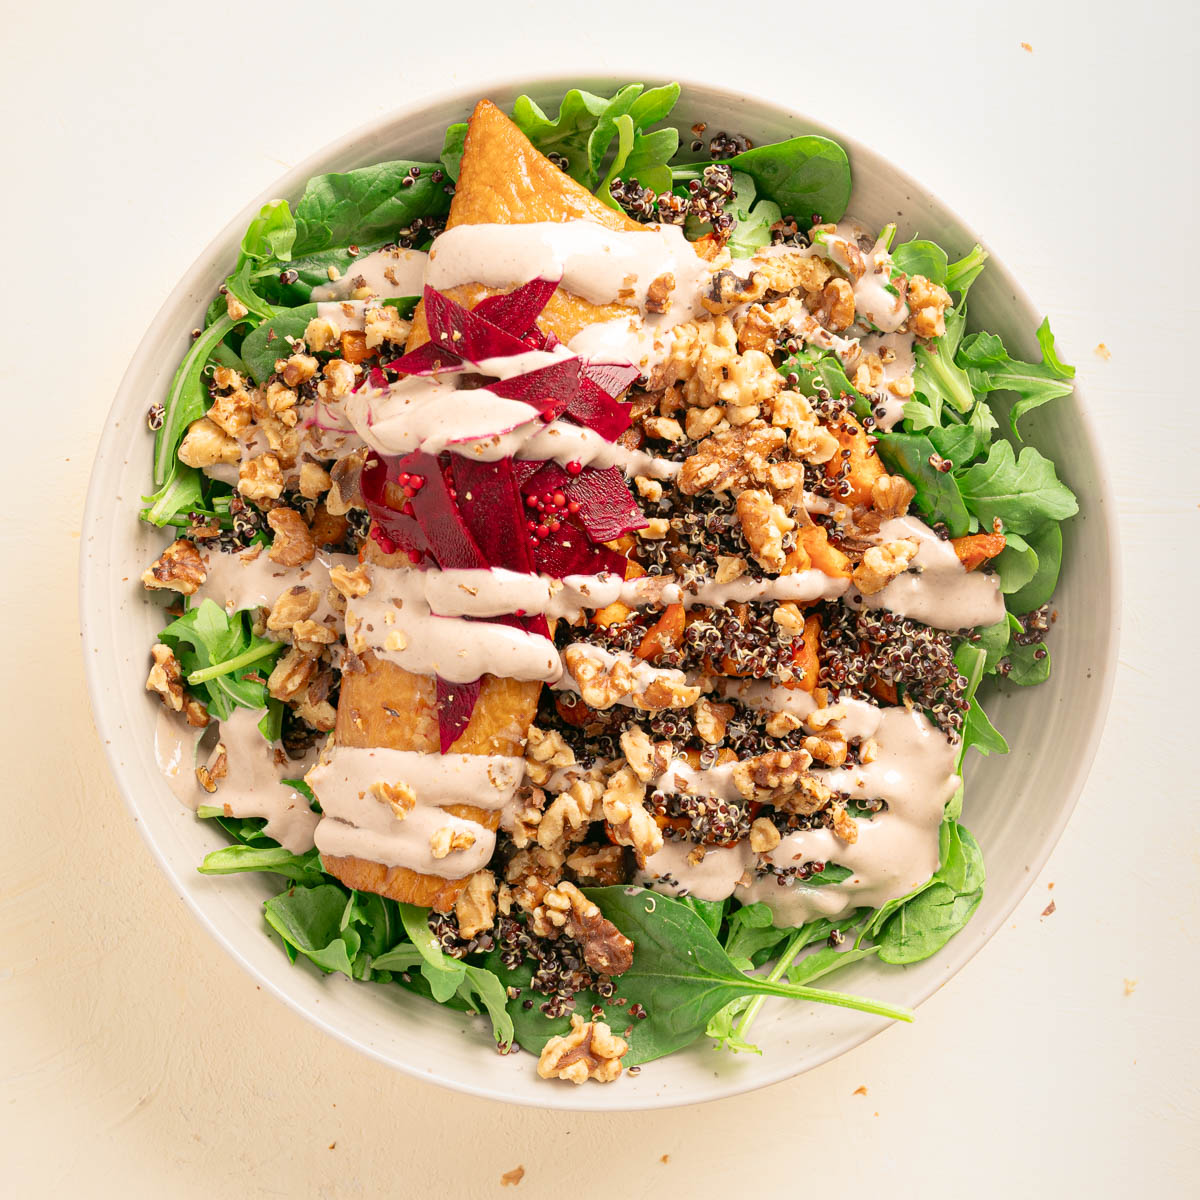 A stoneware bowl with arugula and spinach salad topped with toasted vegetables, quinoa, smoked fish, pickled beets, toasted walnuts, and a creamy walnut dressing.